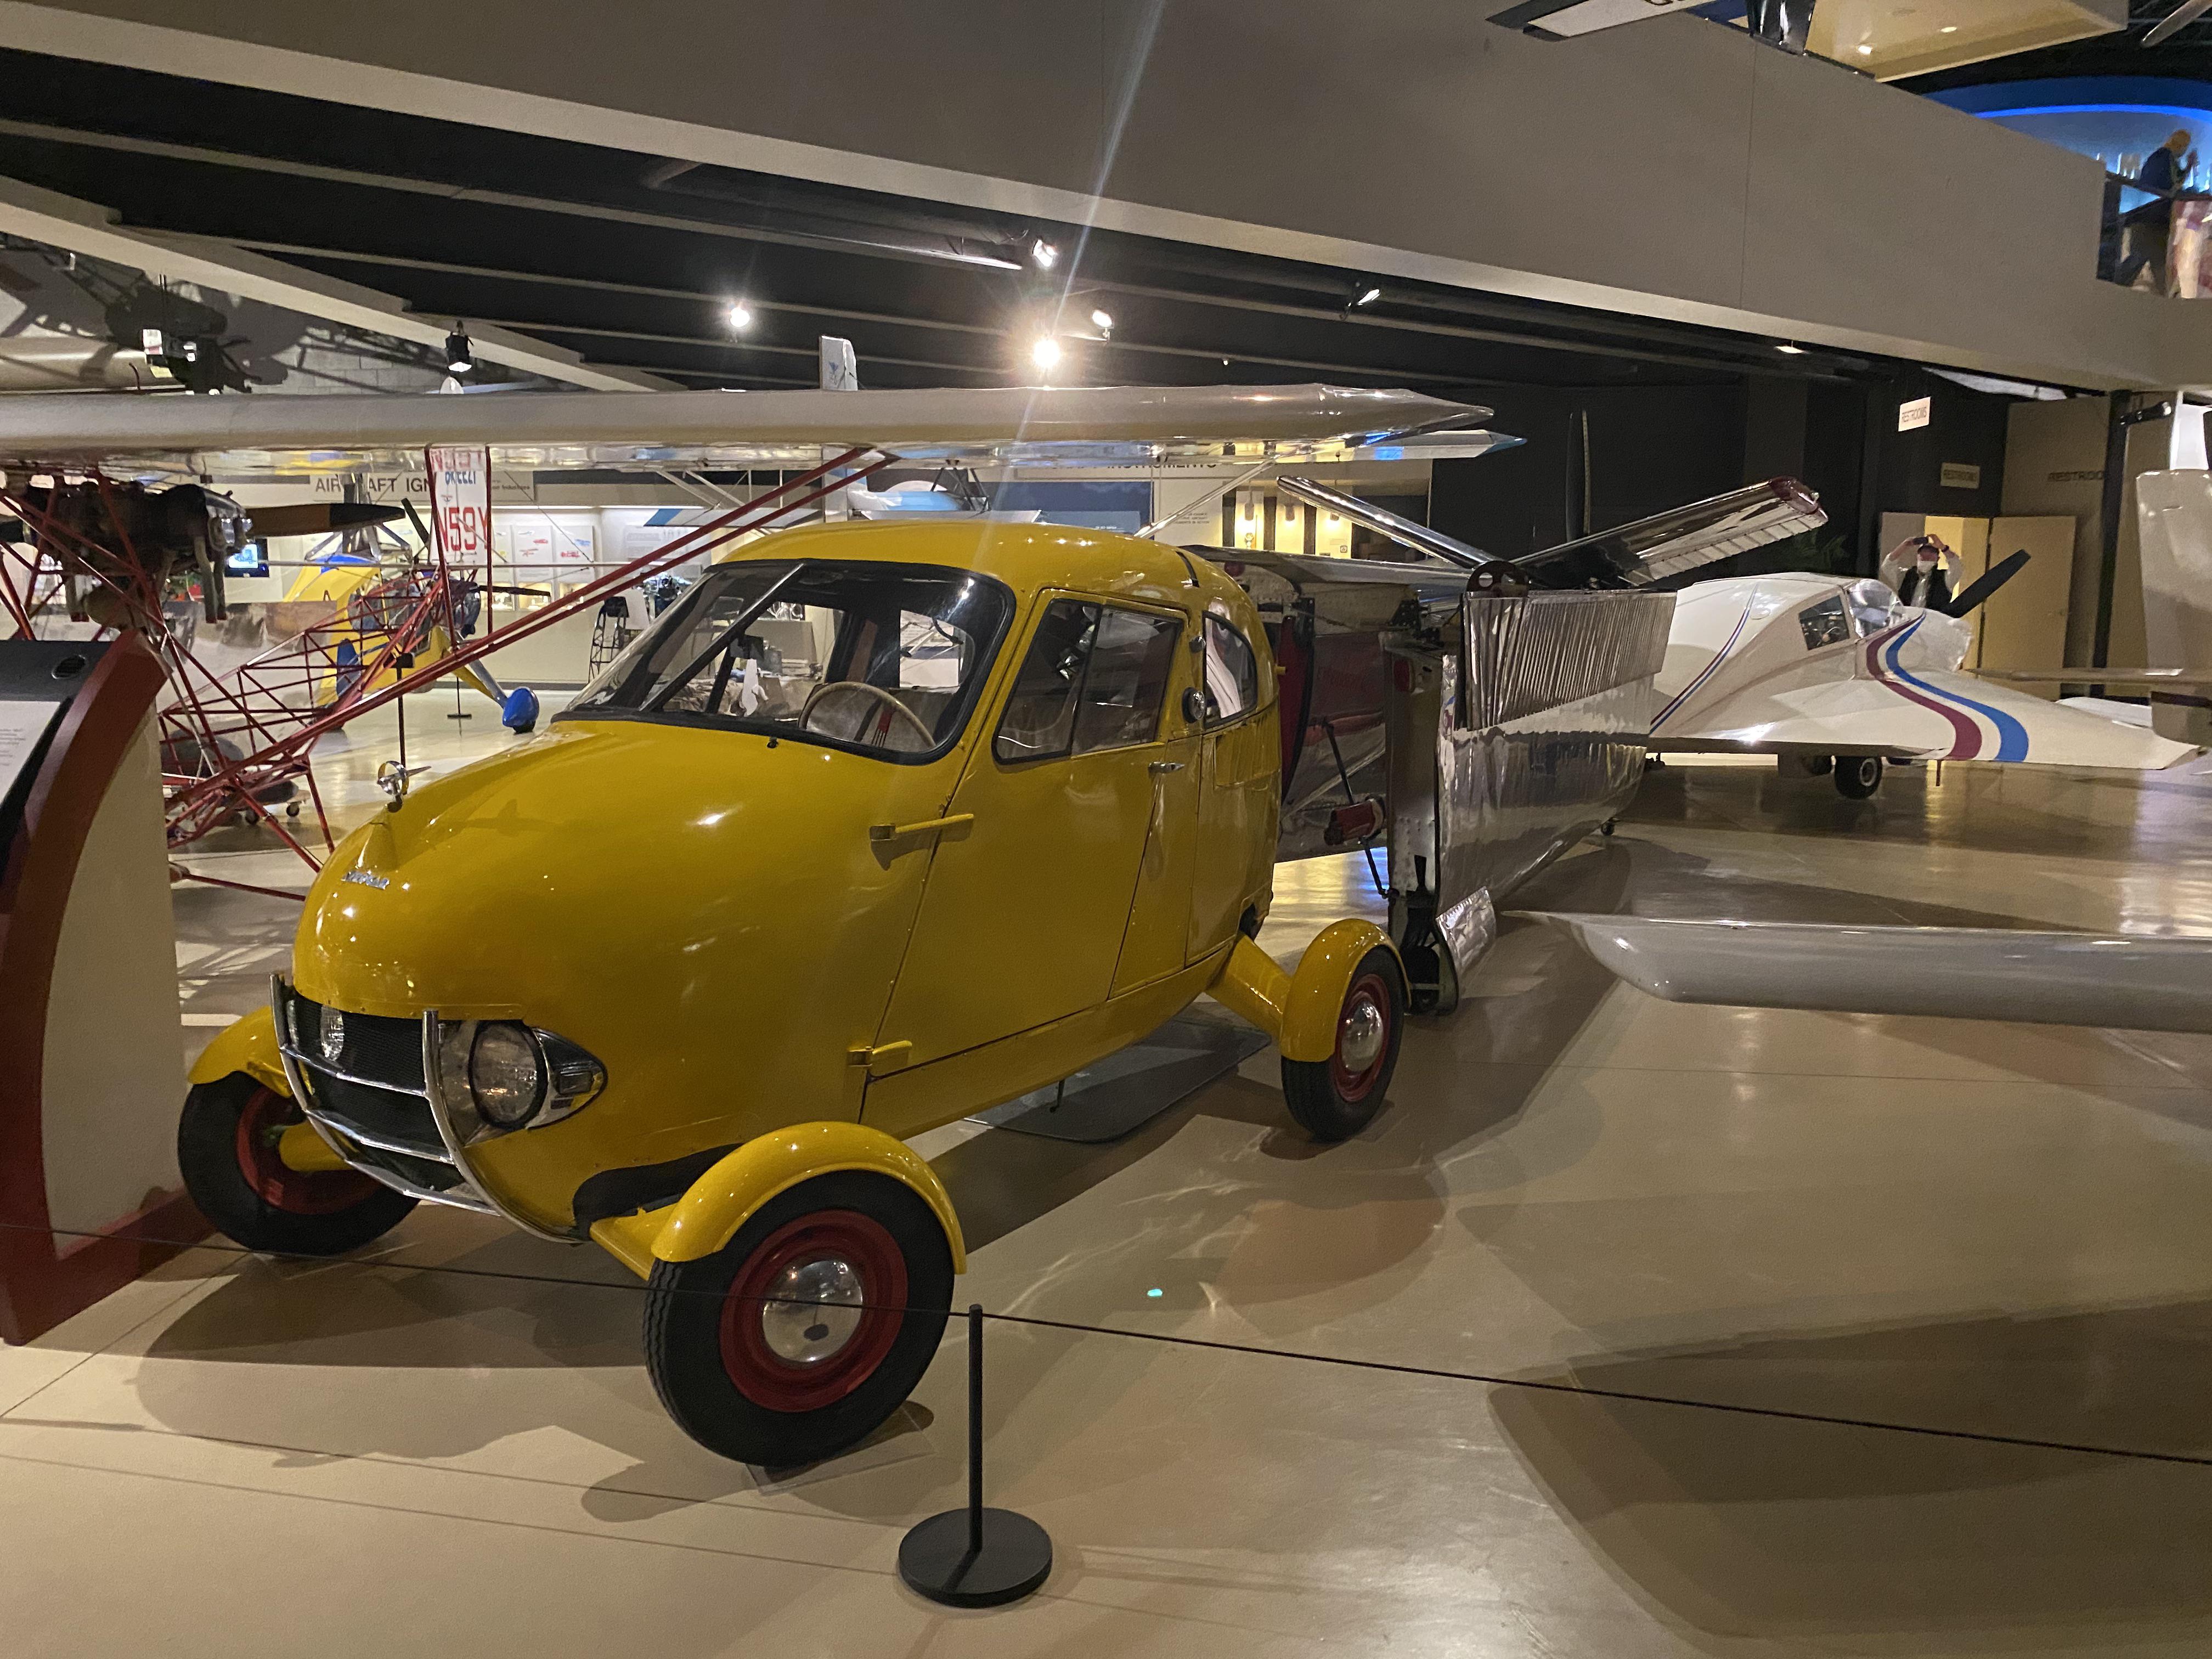 Worlds first flying car. The Aerocar, 1 of 6 built. Built in 1949.jpg